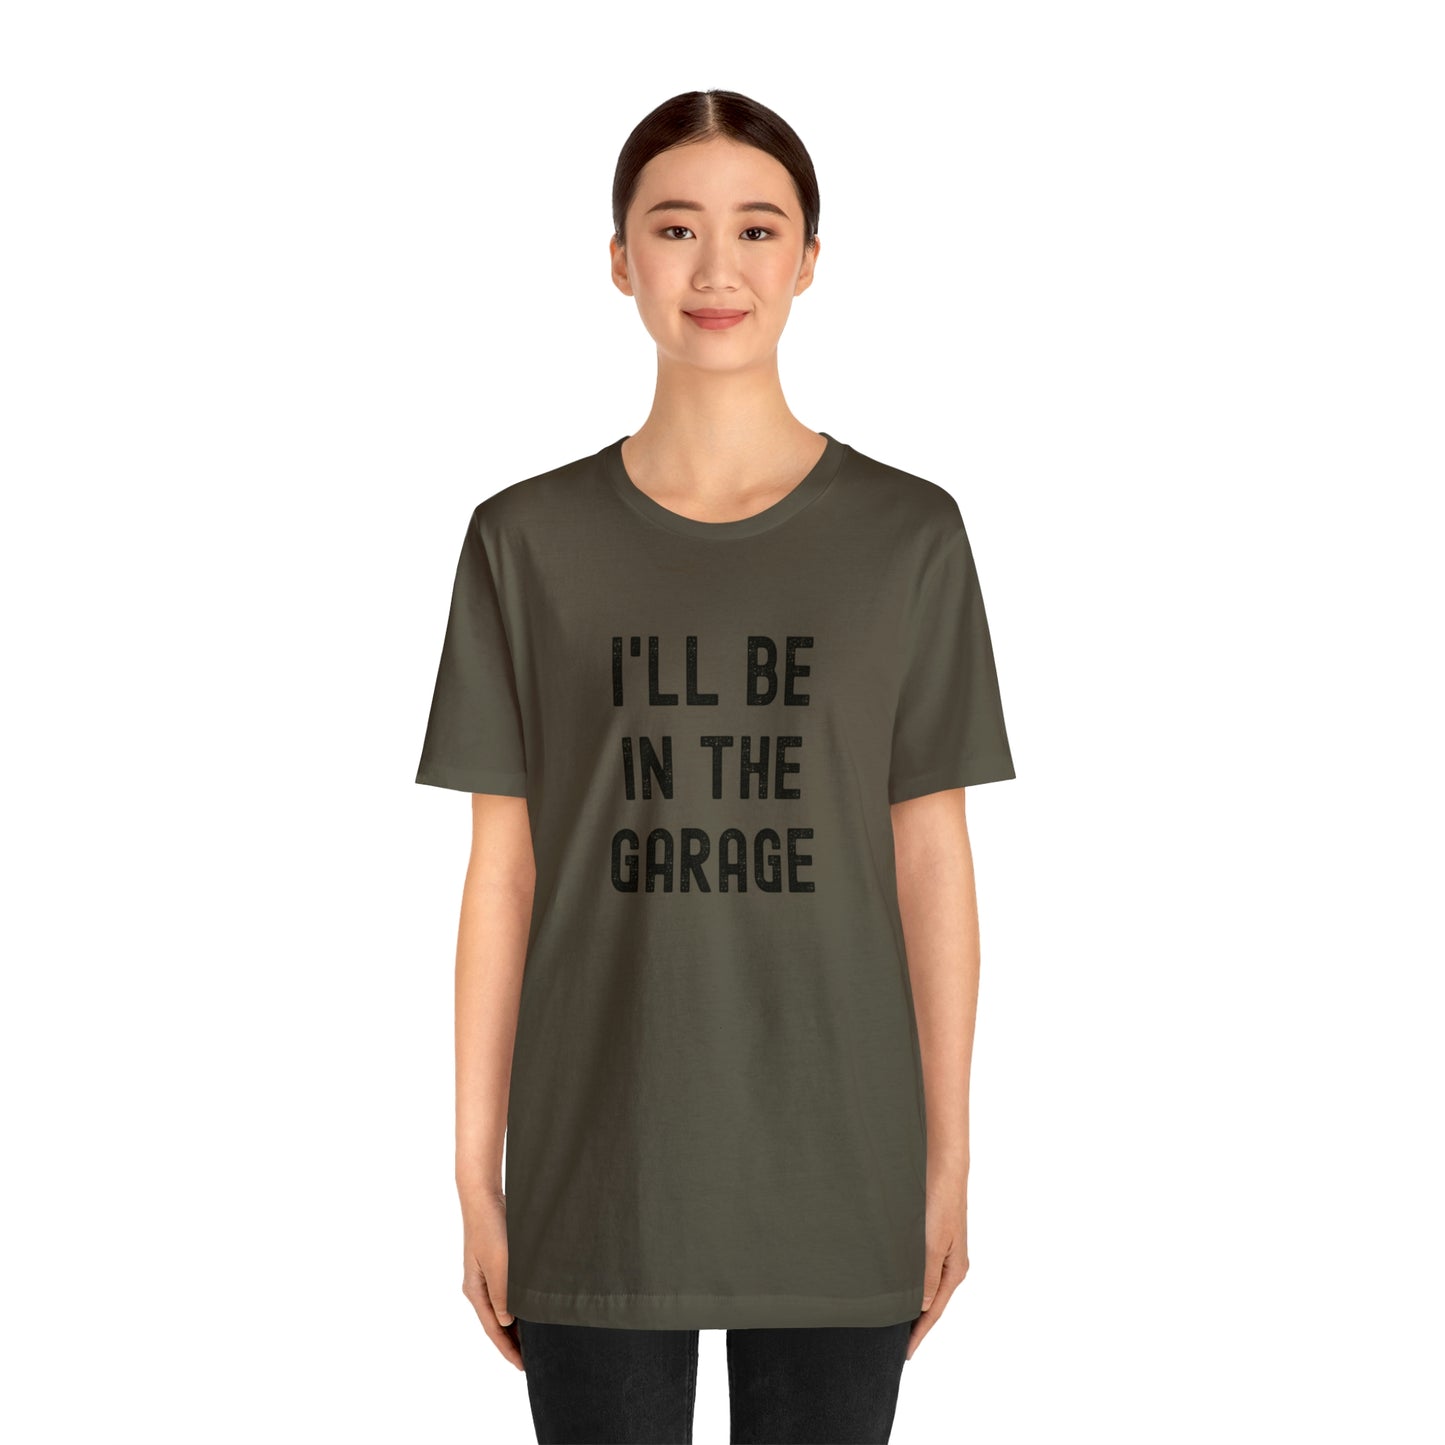 I'll Be In the Garage- Unisex Jersey Short Sleeve Tee